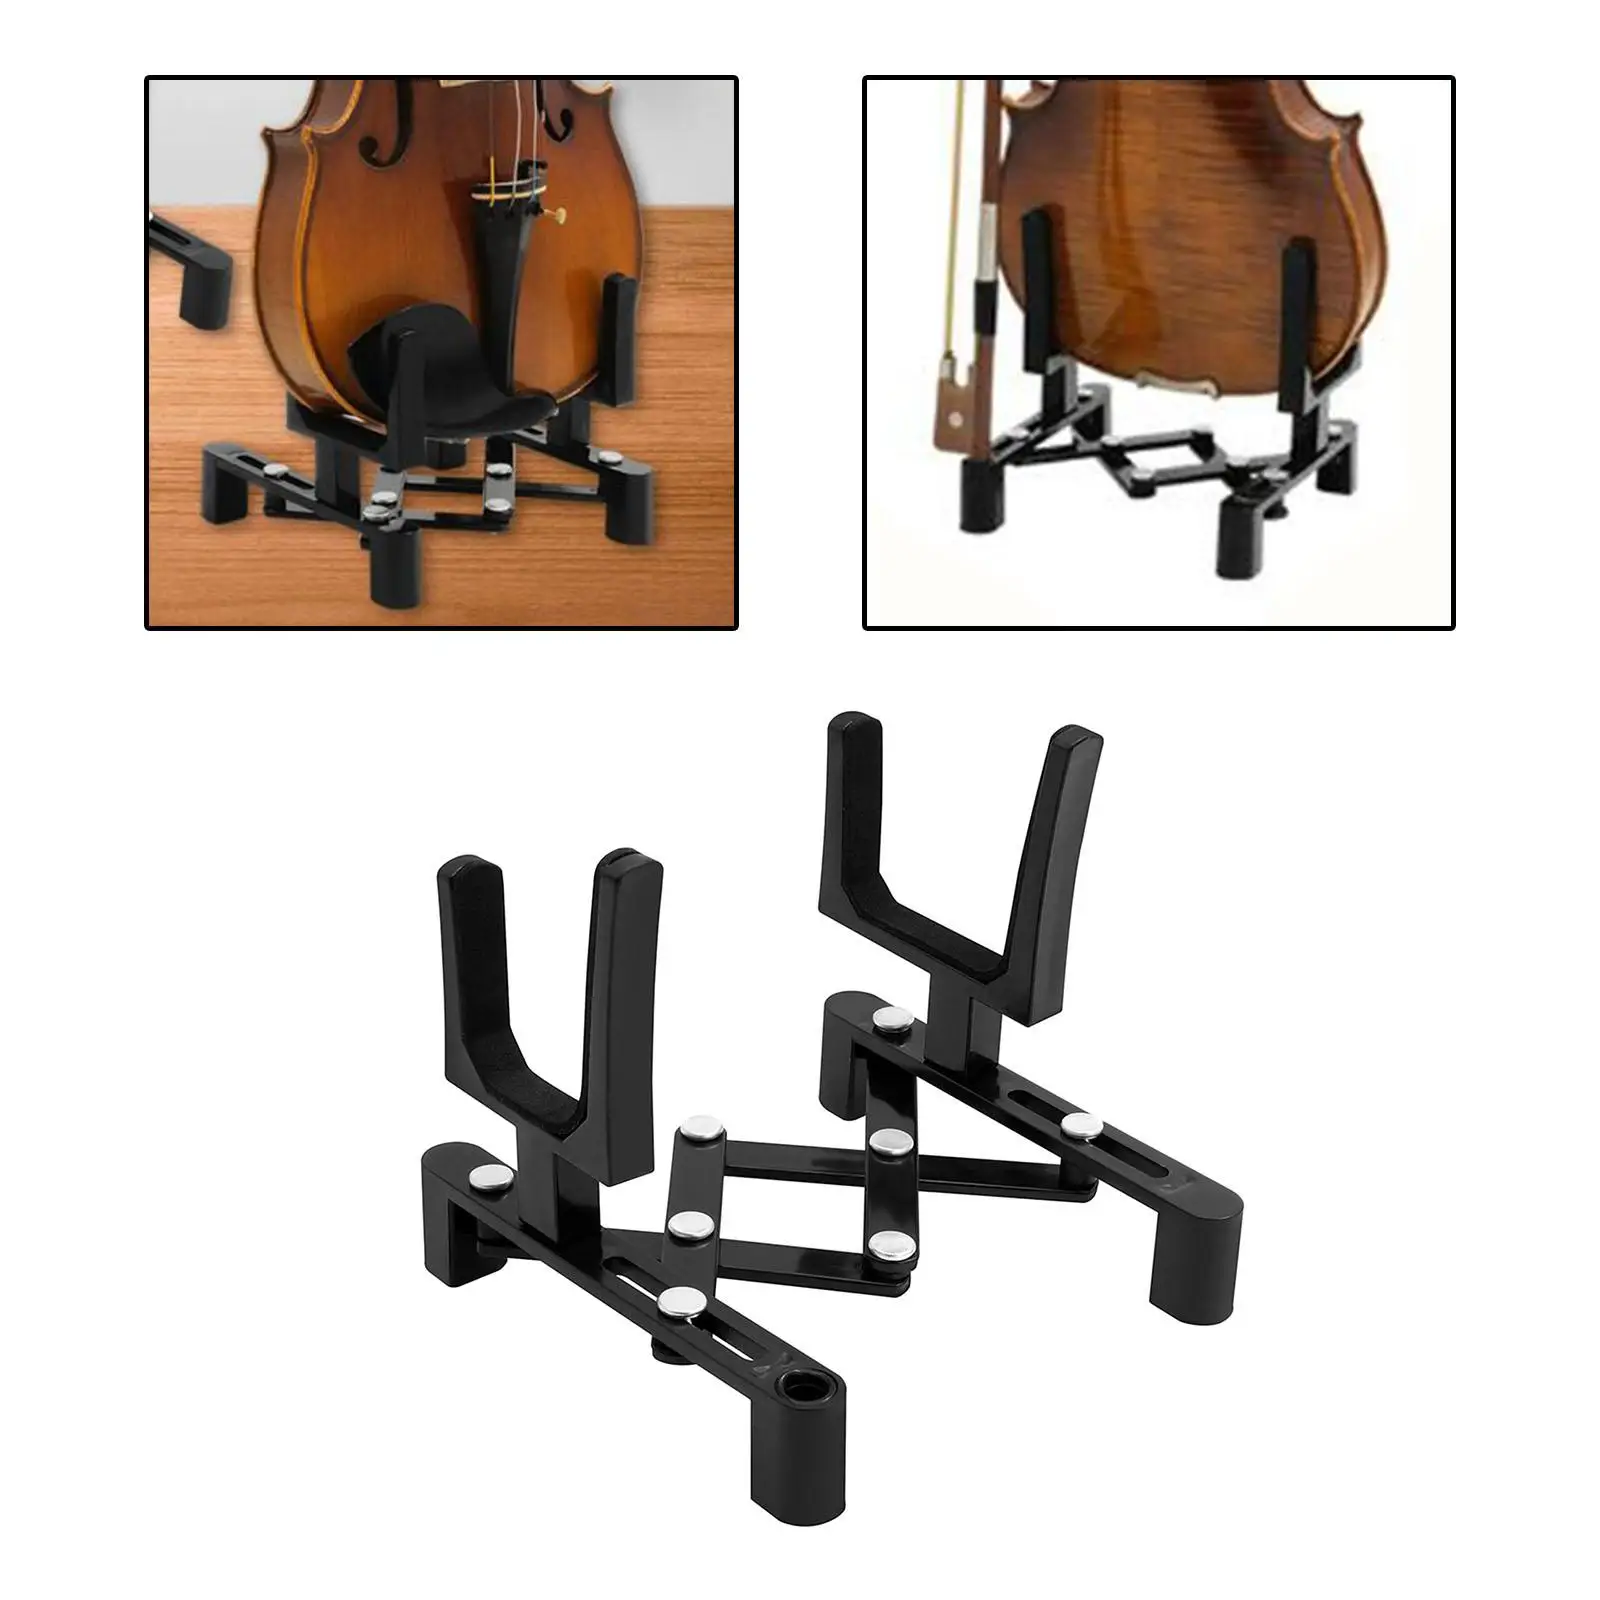 Folding Violin Holder Suppport  Lightweight Floor Stand Portable  Padded Anti Scratches Anti Slip  Violin